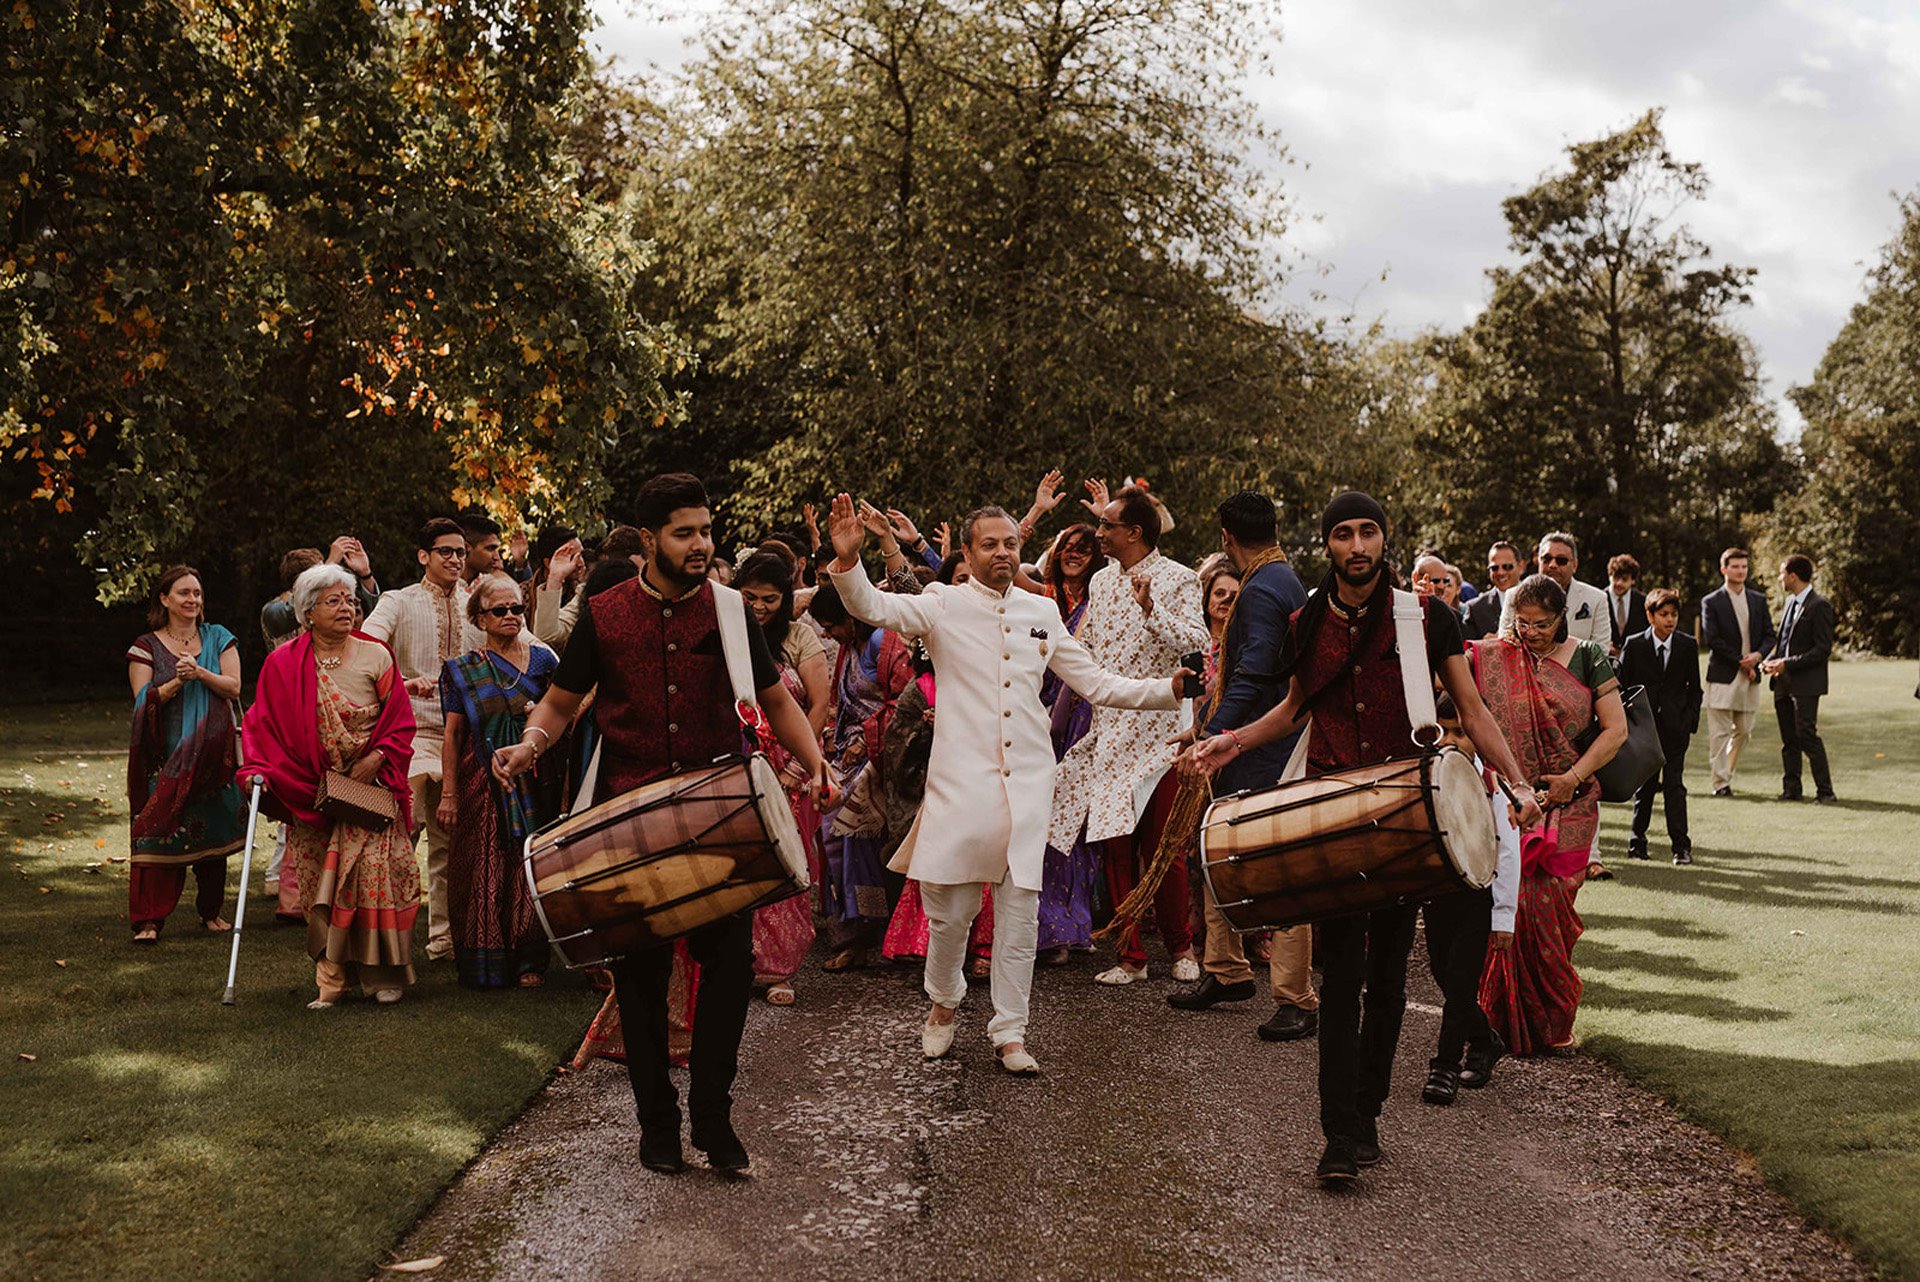 Baraat procession for arrival of the groom with dhol drummers and dancing walking along driveway at indian wedding venue elmore court